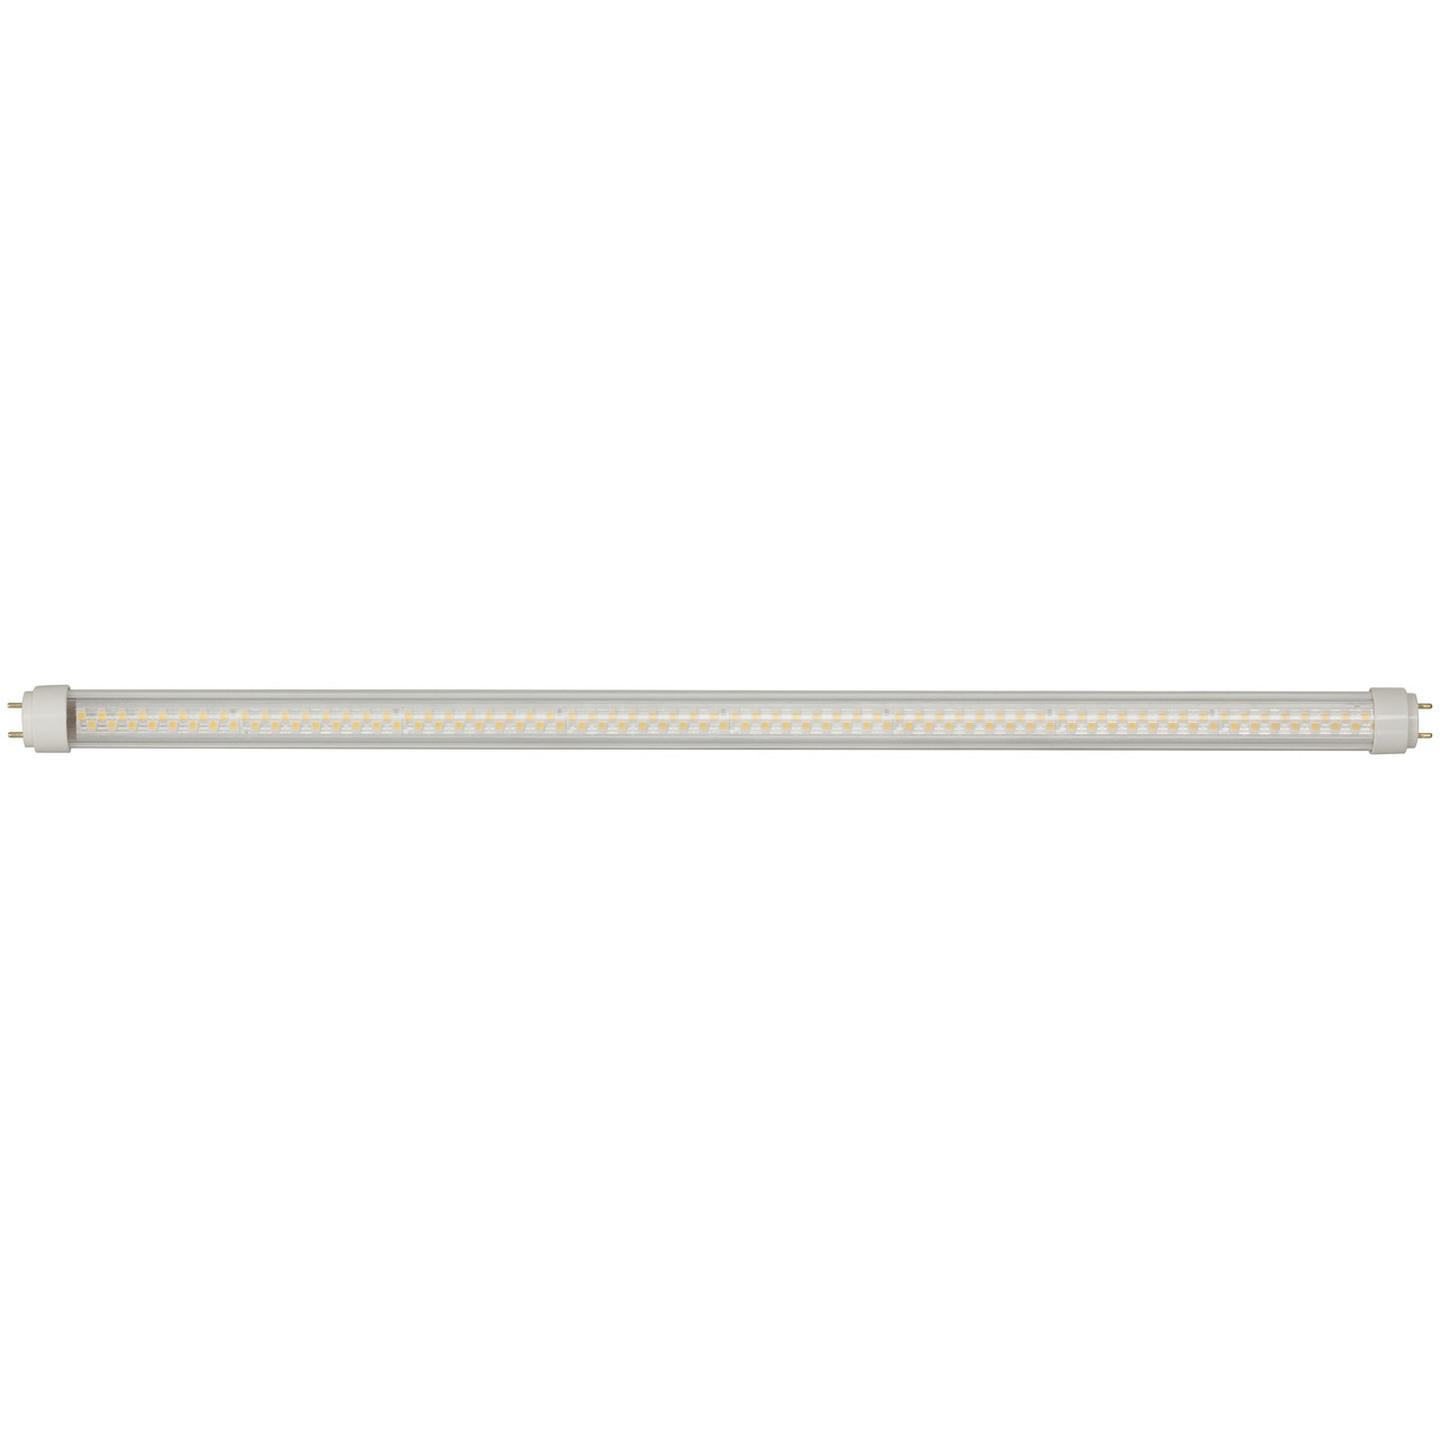 Viribright LED T8 Fluoro Replacement Tube 10W 600mm Natural white